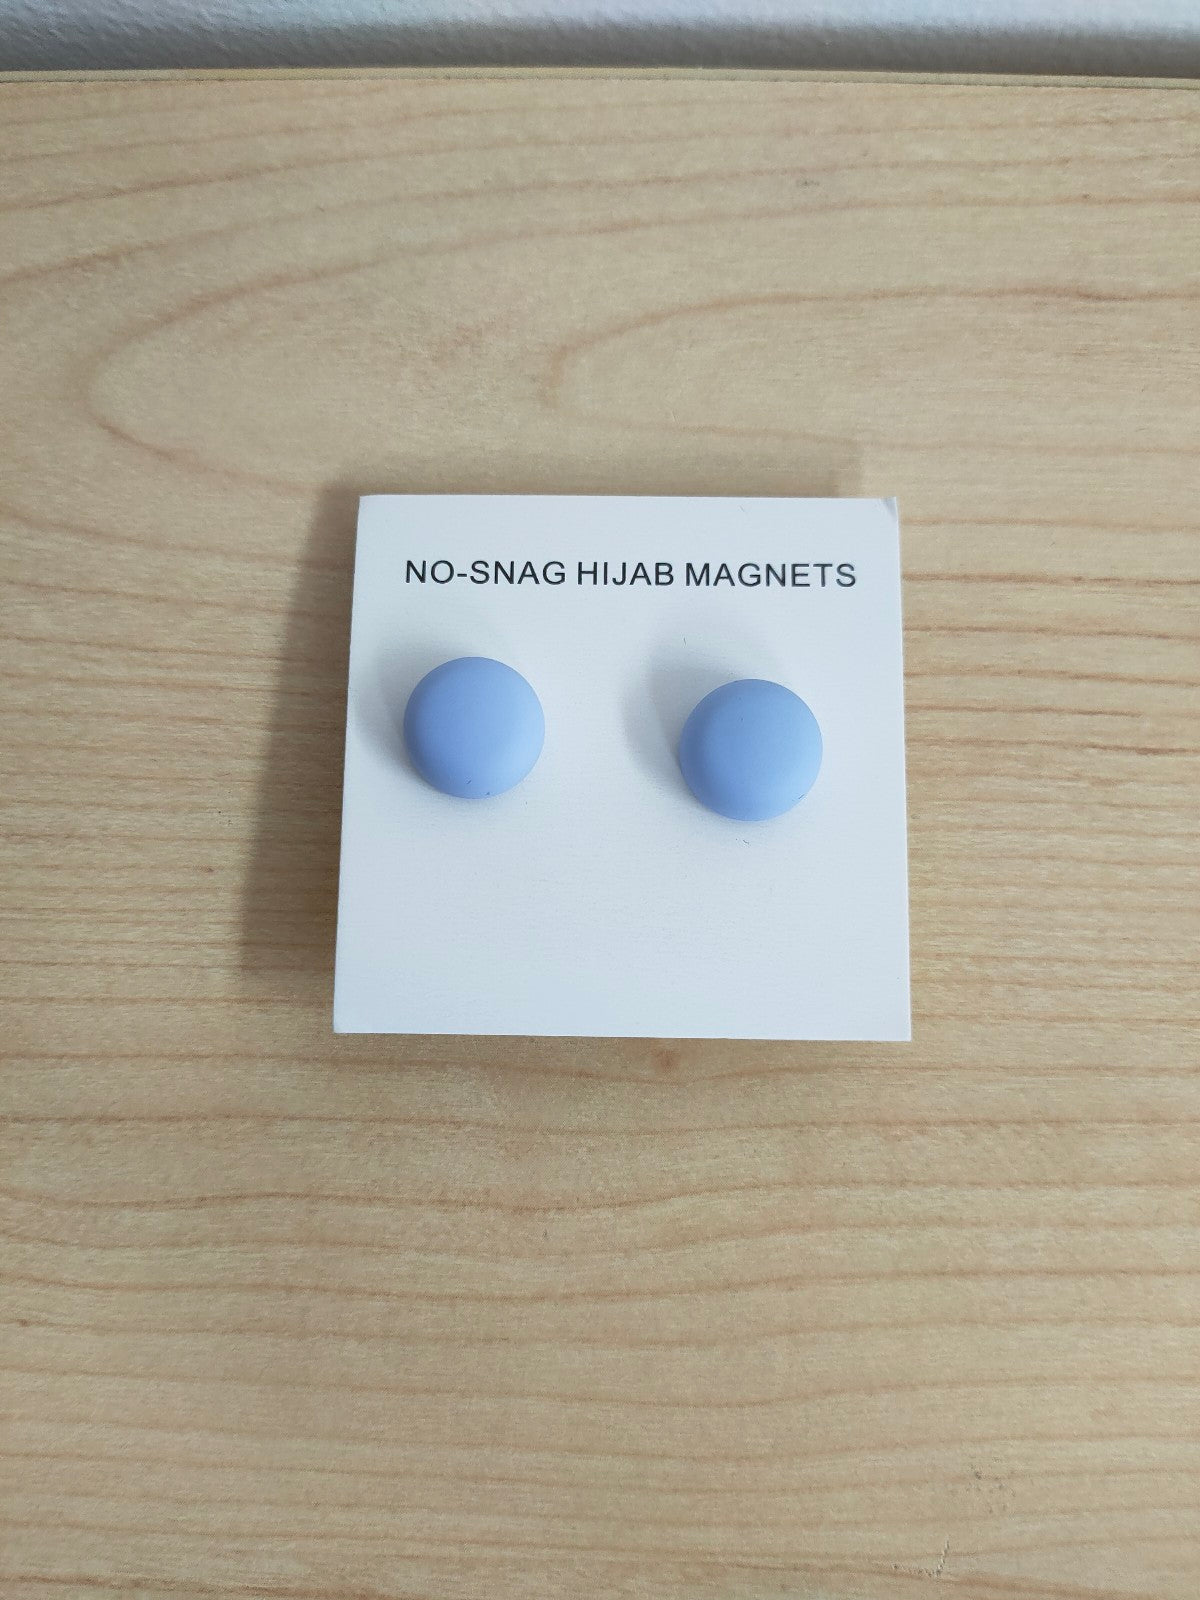 Explore our Hijab Magnets in Dusty Blue Twin-Pack for a seamless and stylish way to secure your hijab. Shop now at Hikmah Boutique for premium magnetic hijab fasteners.